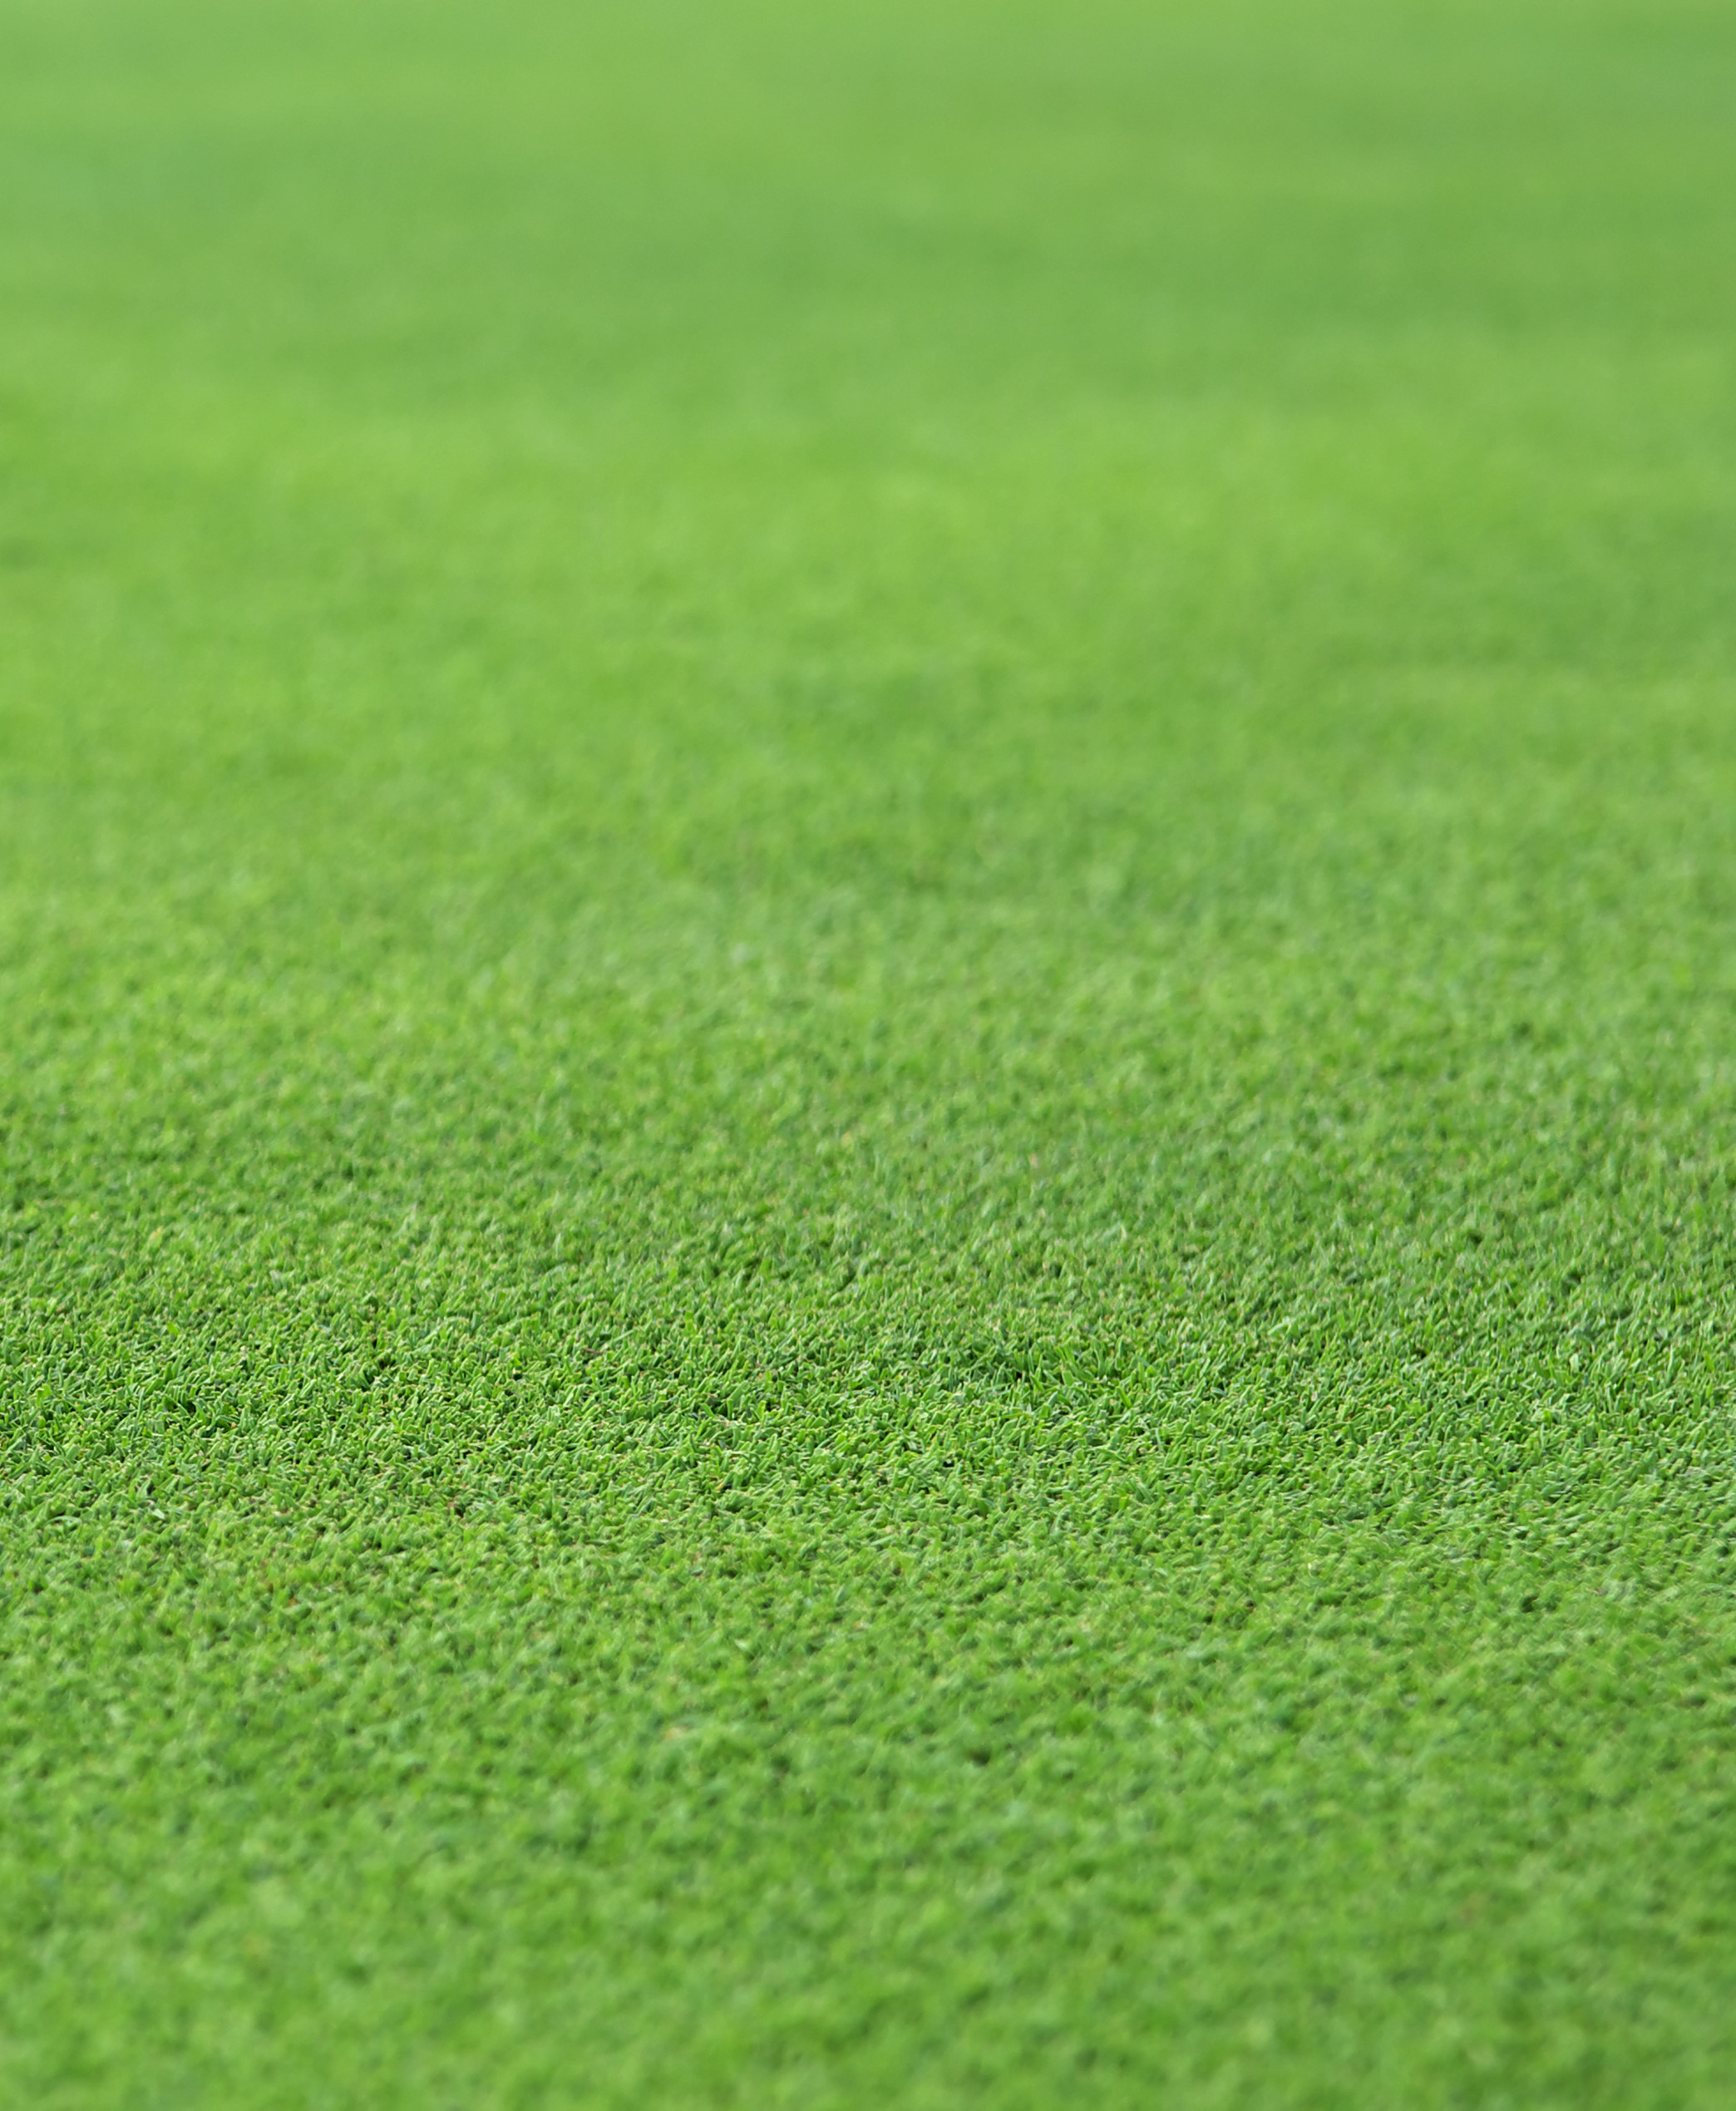 2088x2539 Stock photo of a perfect grass texture from a golf hole green